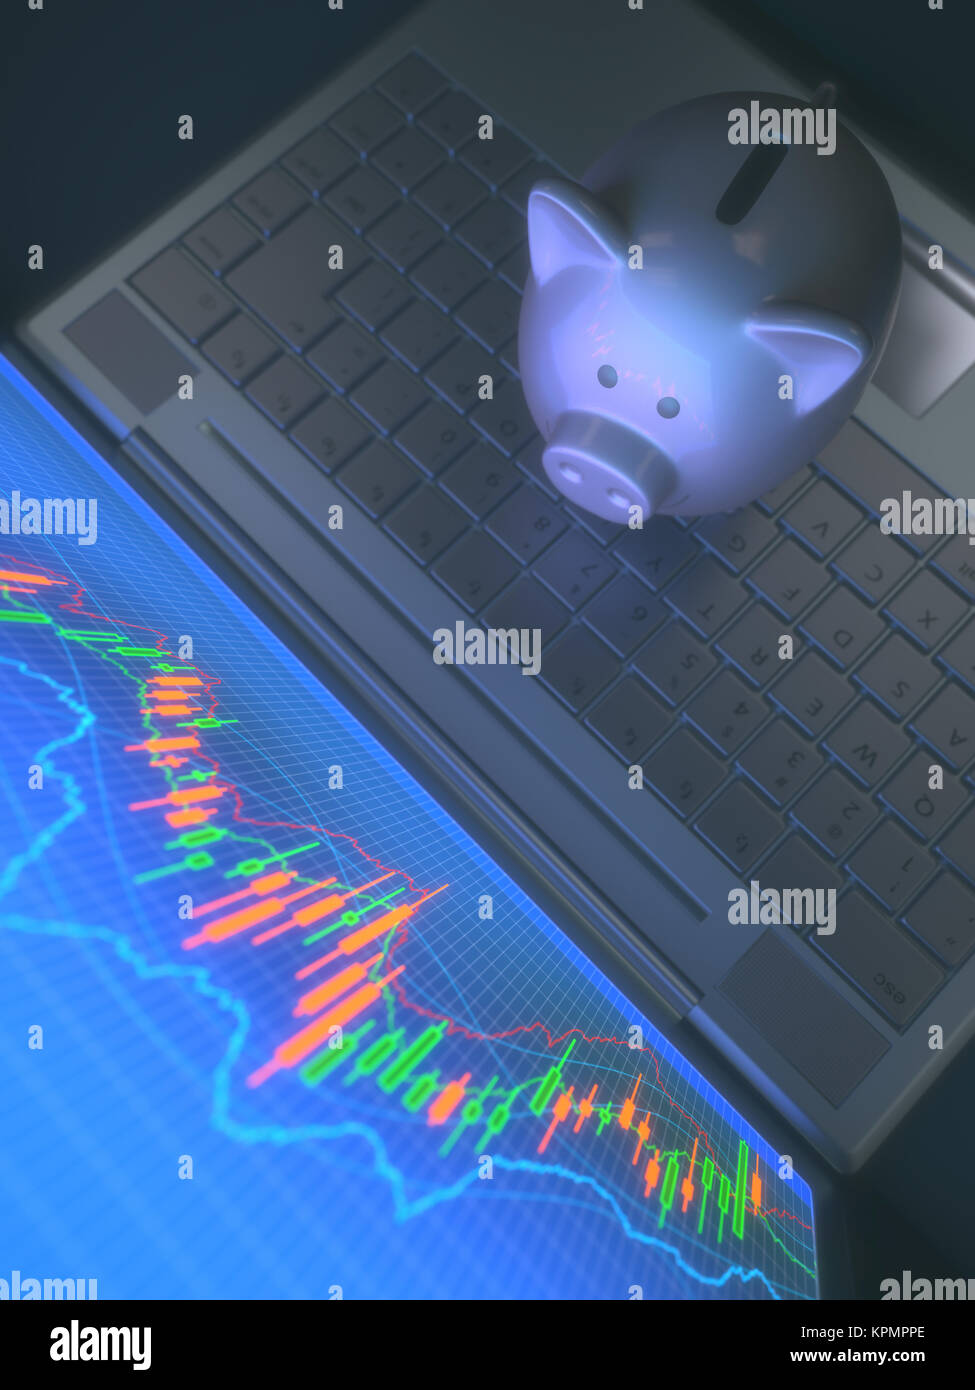 Robot Trading System And Piggy Bank Stock Photo